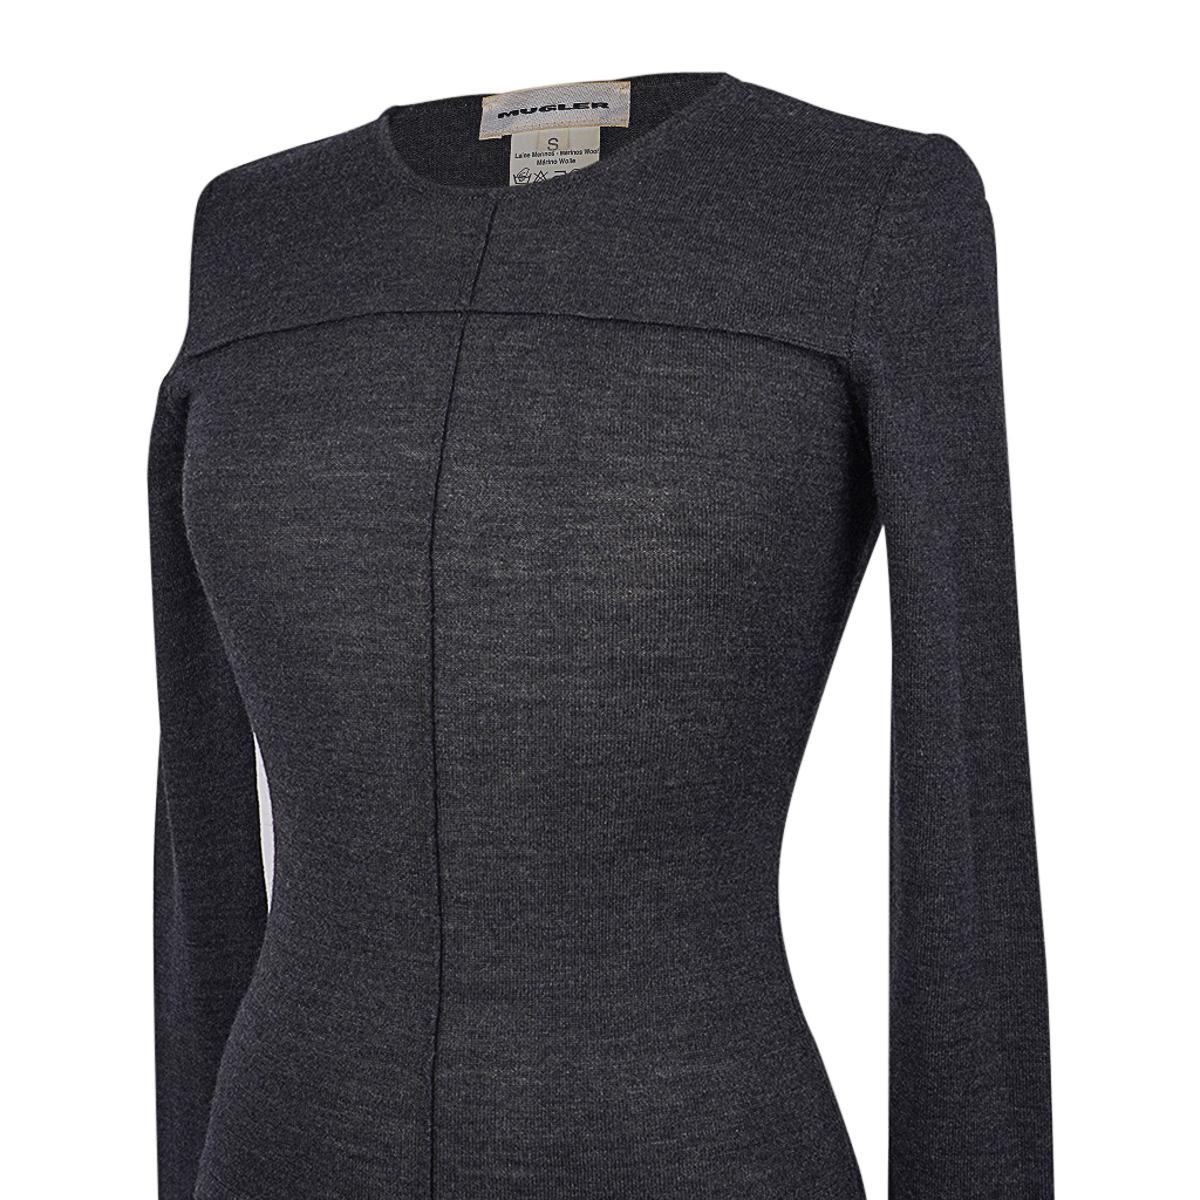 Mugler Vintage Charcoal Gray Knit Top Classic S 1